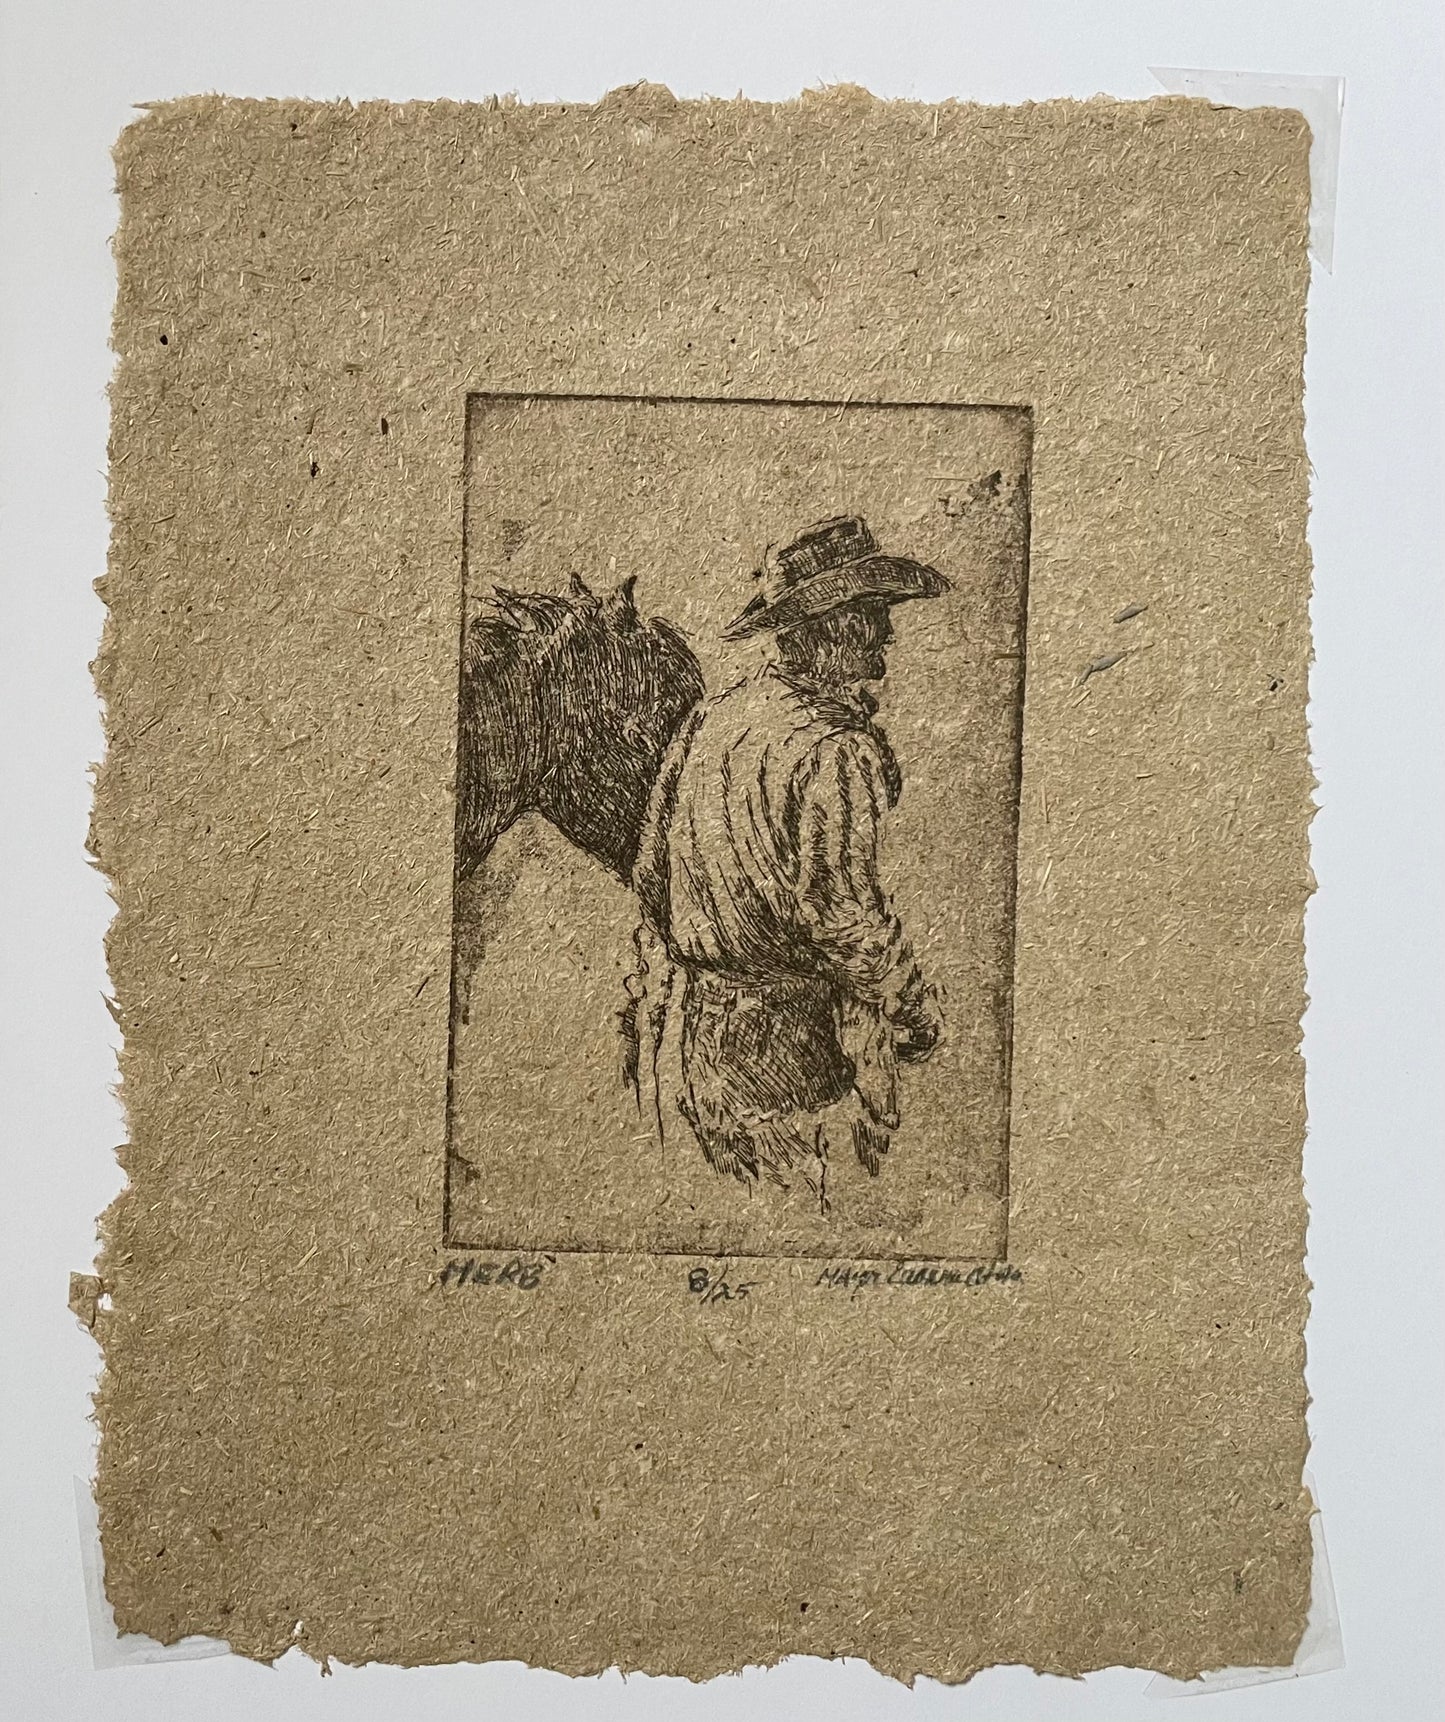 " Herb " Cowboy and Horse Intaglio Etching on Handmade Paper